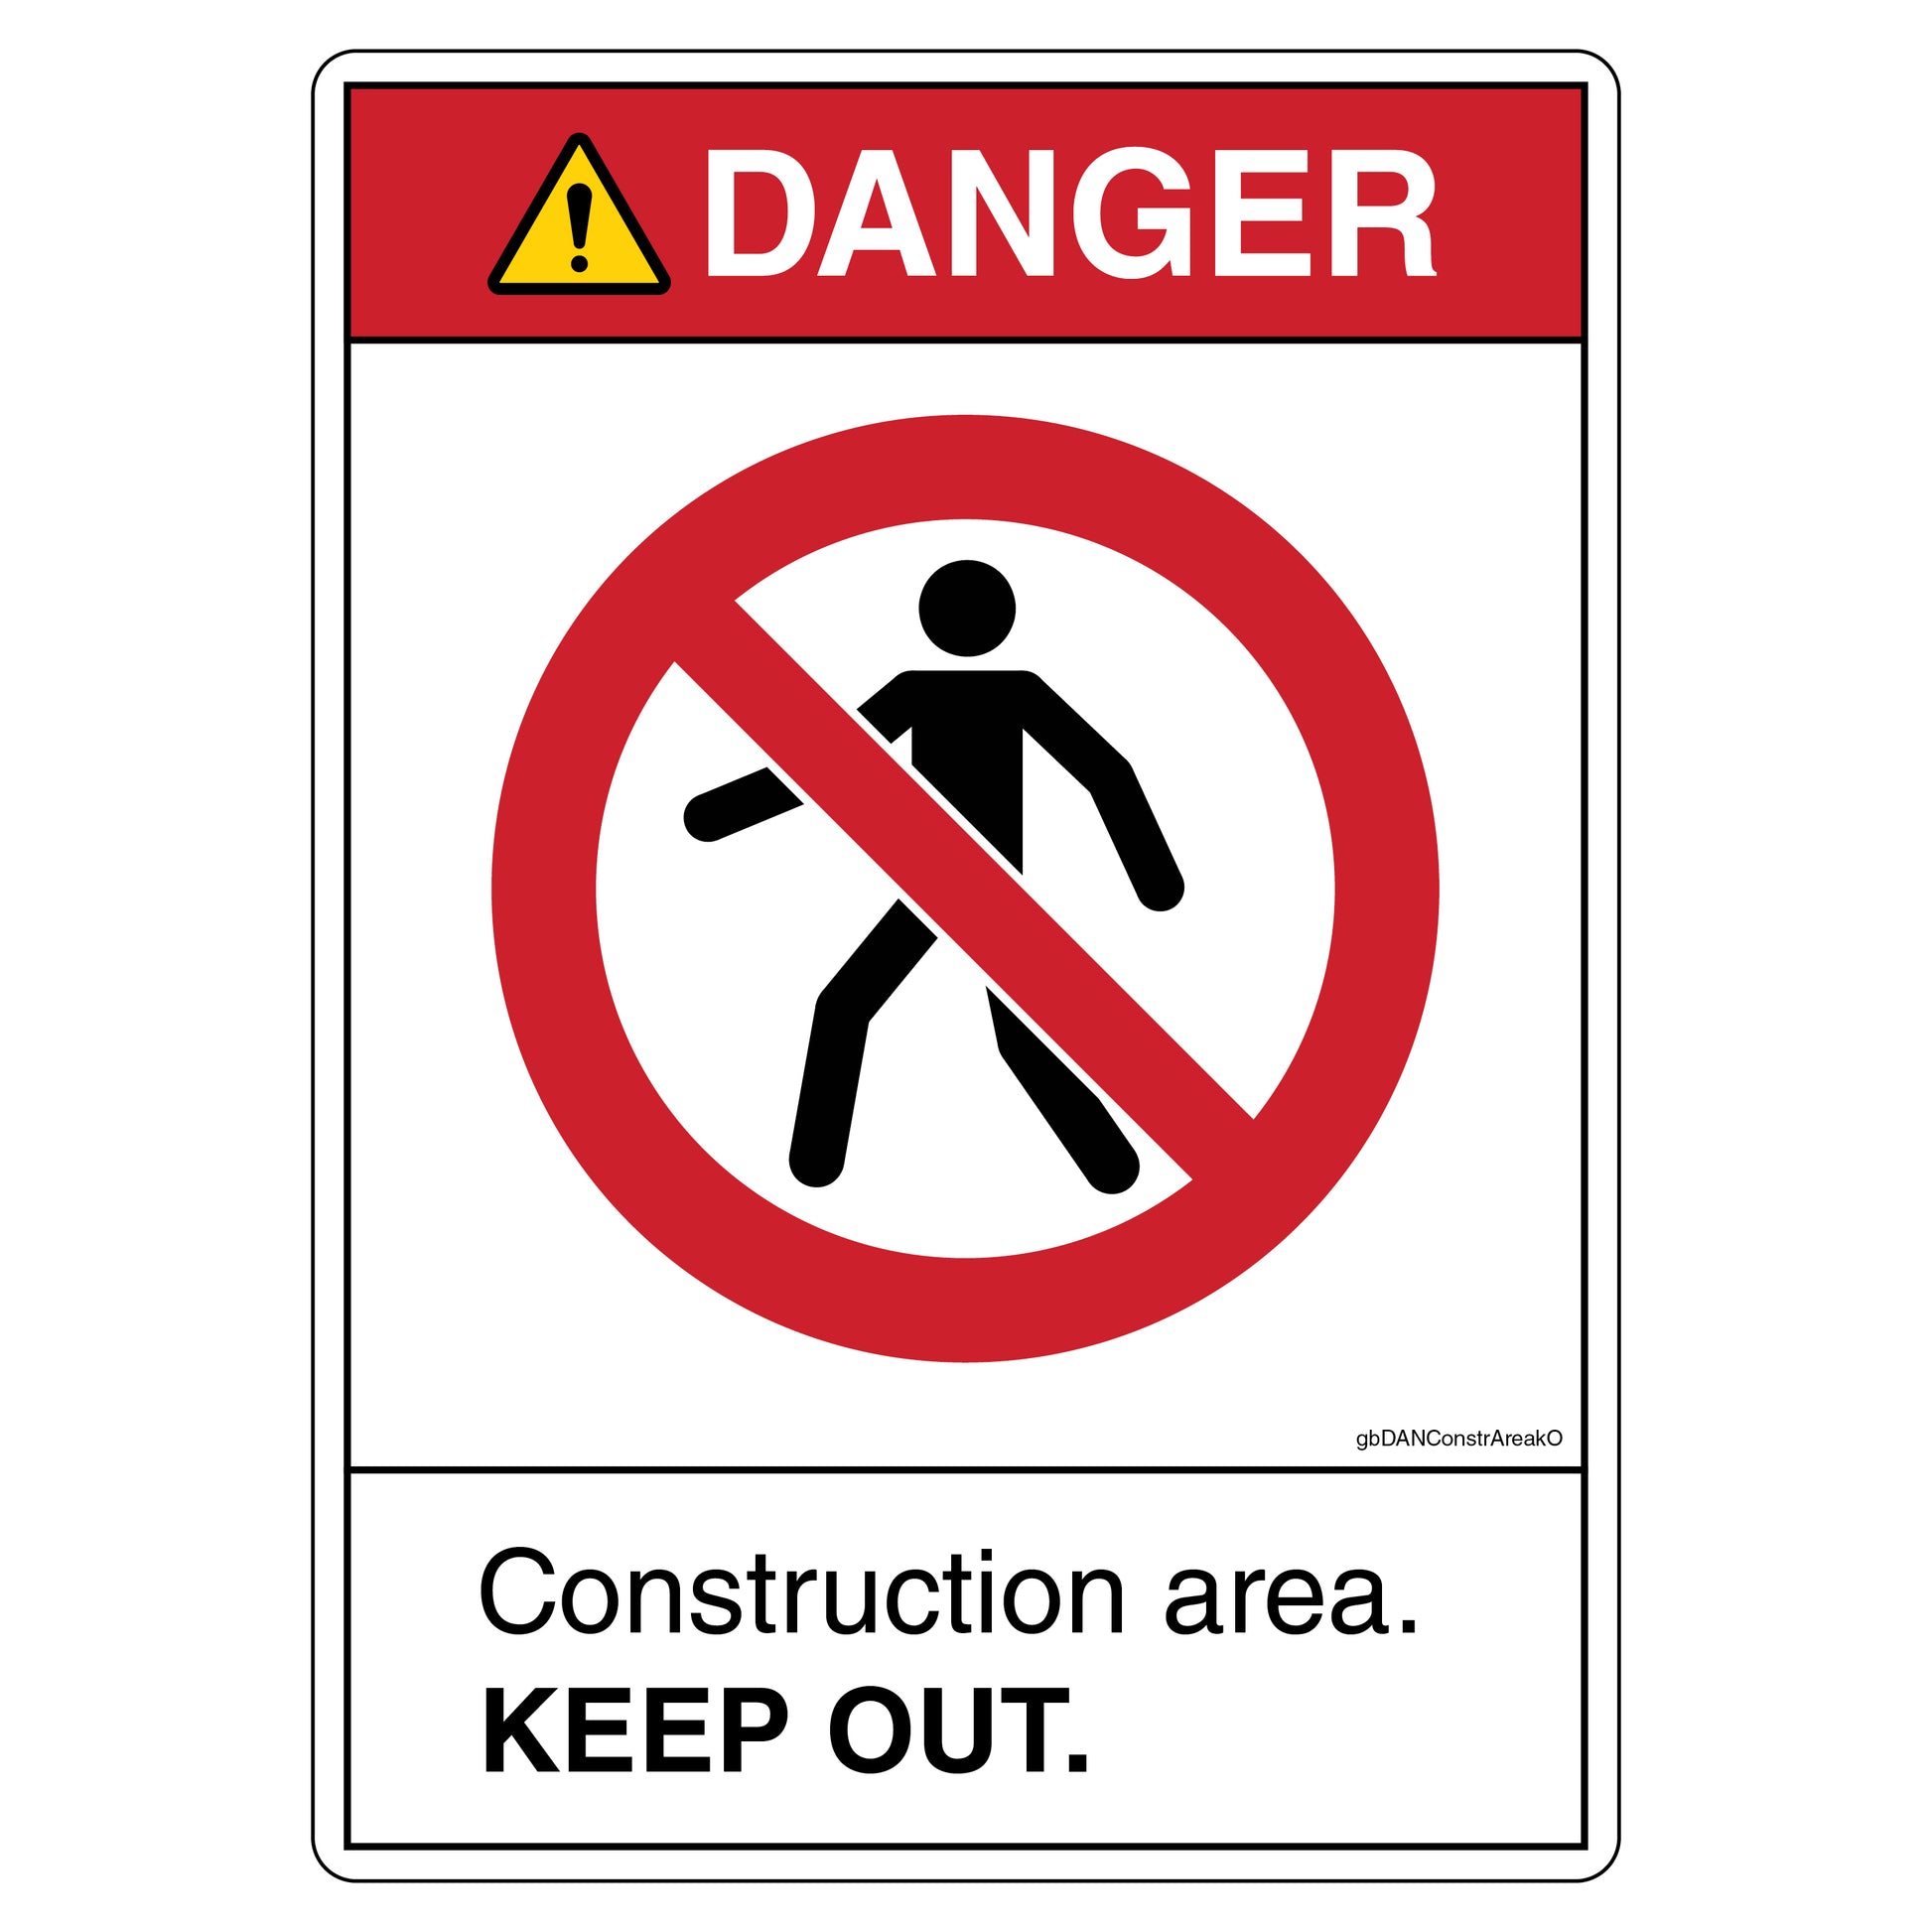 Danger Construction Area Keep Out Decal.